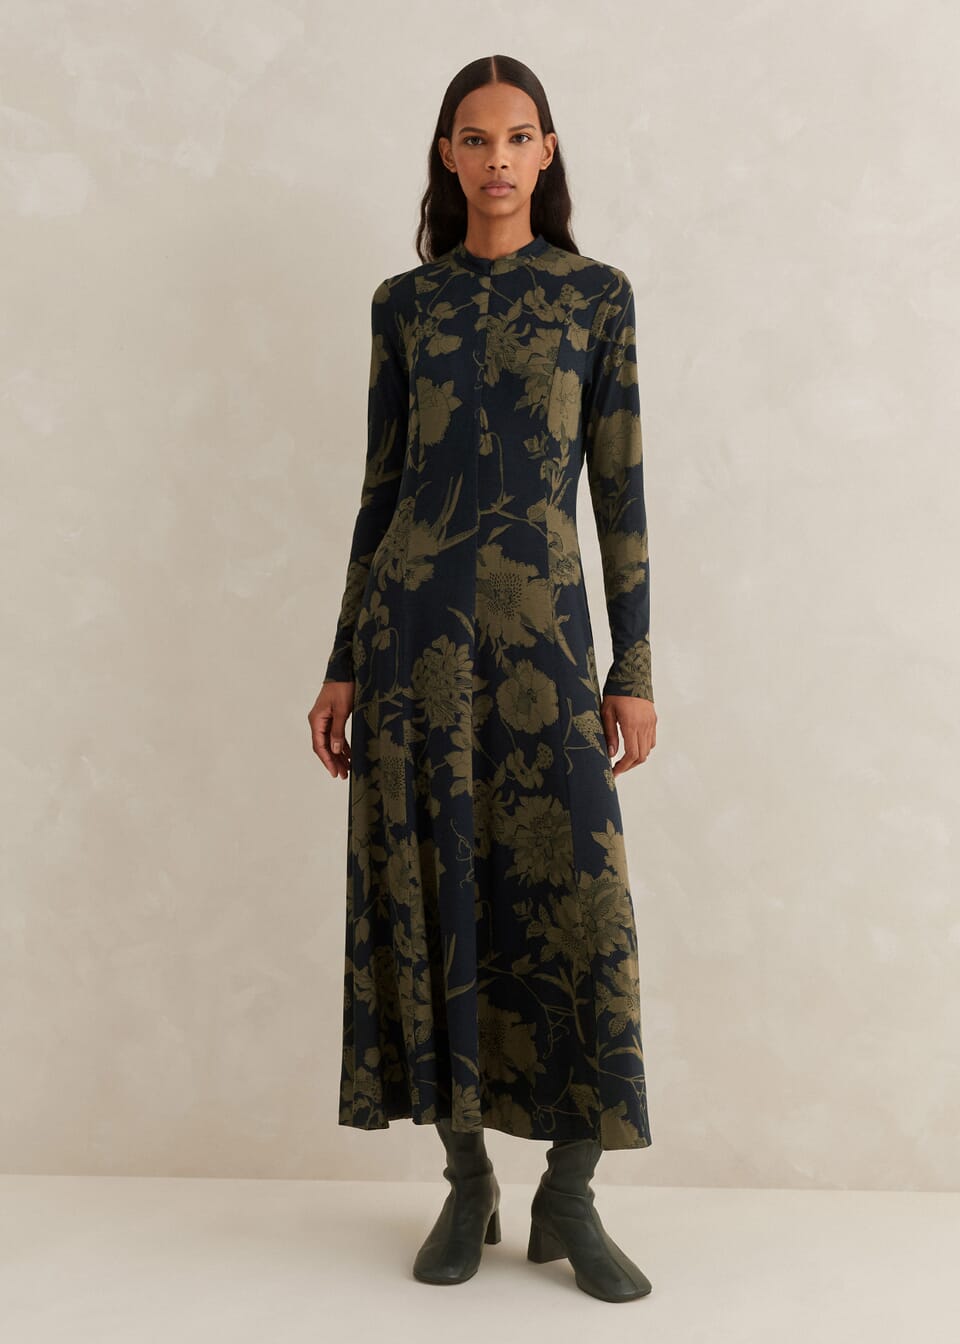 Cementing floral prints in your autumn wardrobe, this long-sleeved dress features our bespoke Scribble Flower print in a combination of navy and khaki set on a black backdrop.